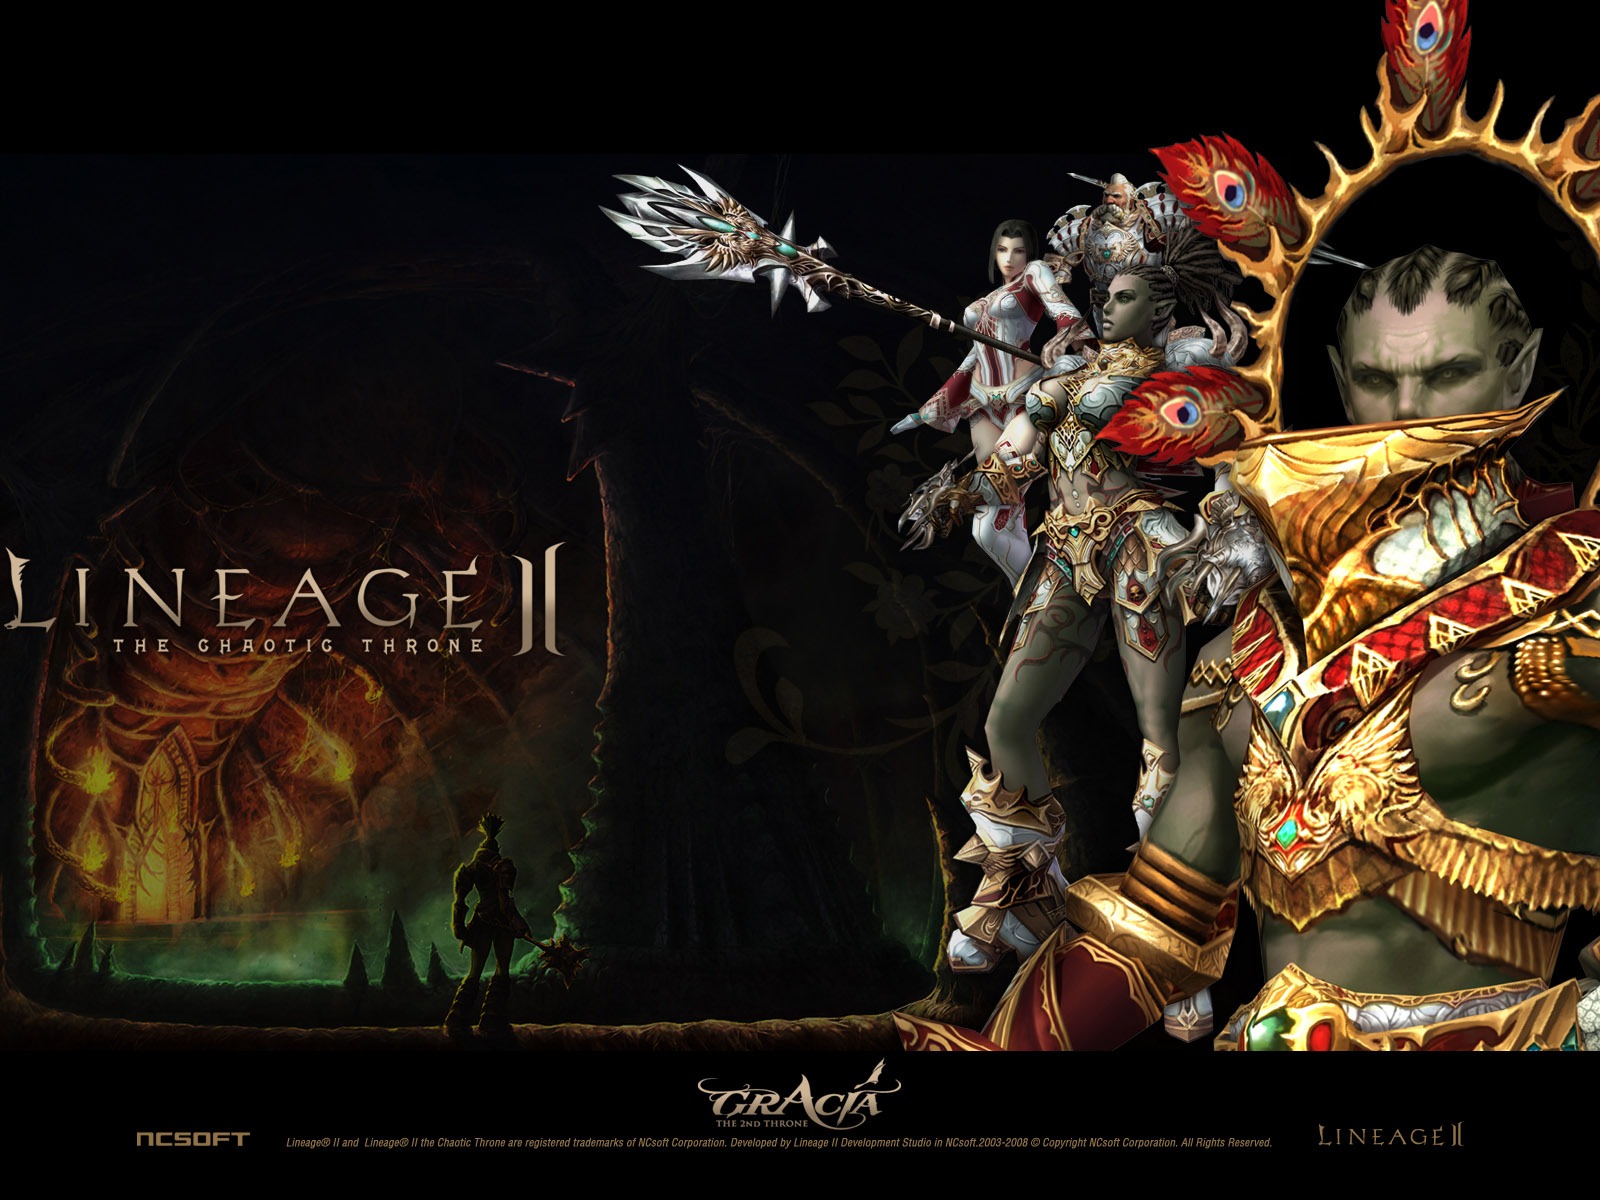 LINEAGE Ⅱ Modellierung HD-Gaming-Wallpaper #2 - 1600x1200